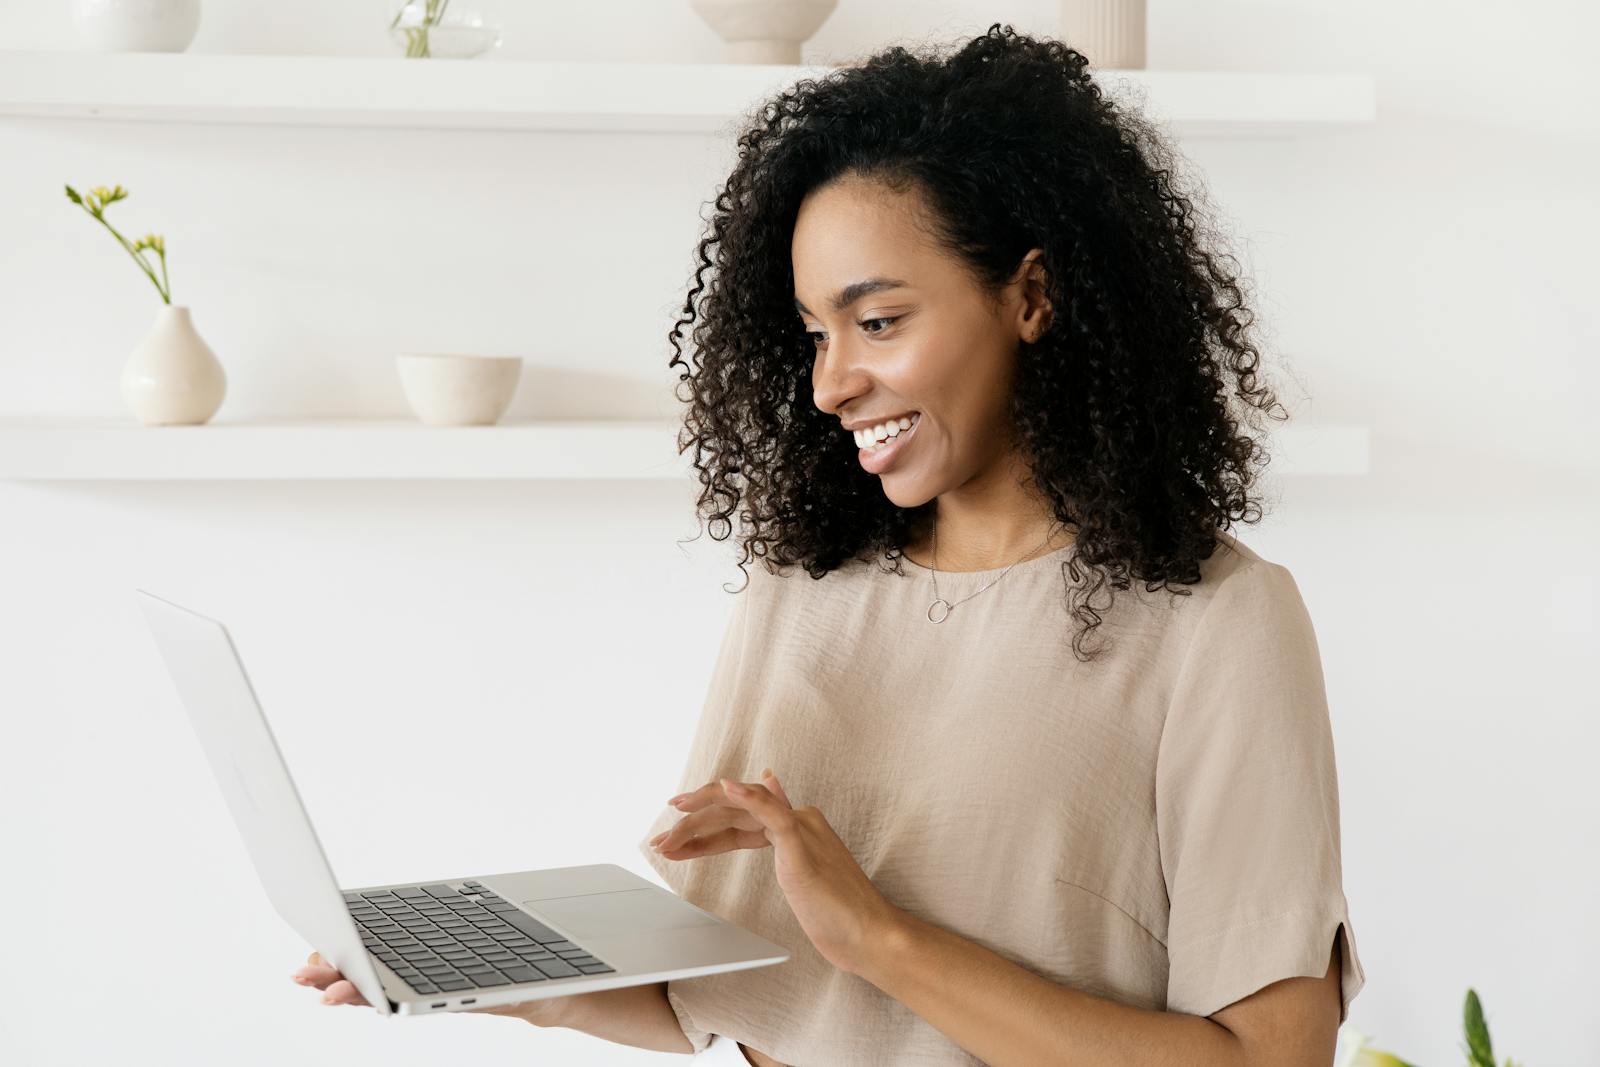 A Woman using a Laptop updating old posts makes her happy